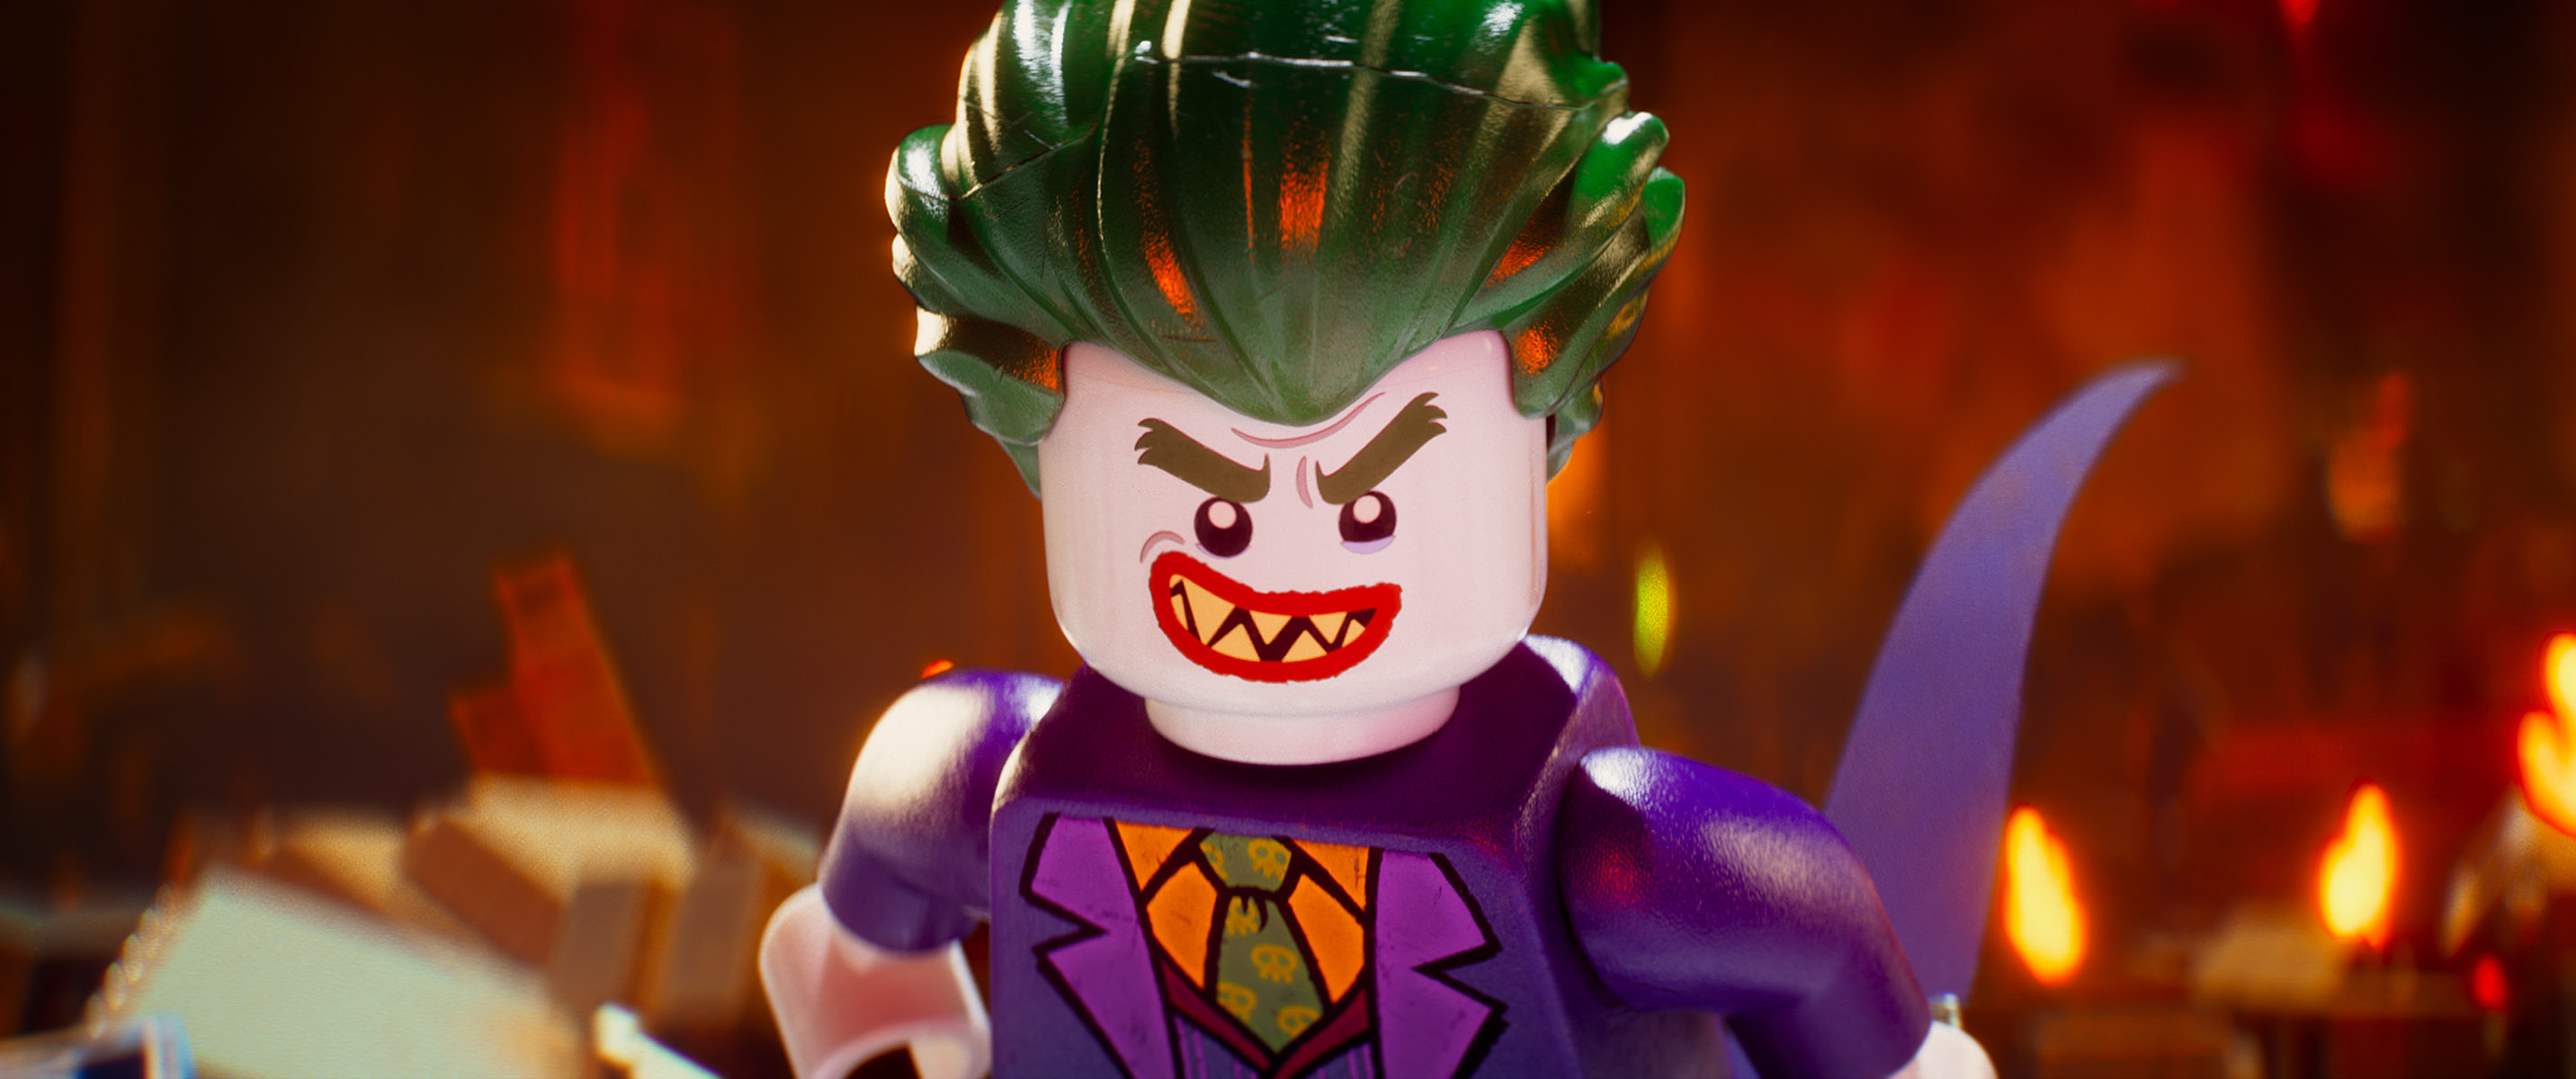 The Lego Batman Movie Feels Like Kind Of A Letdown Review